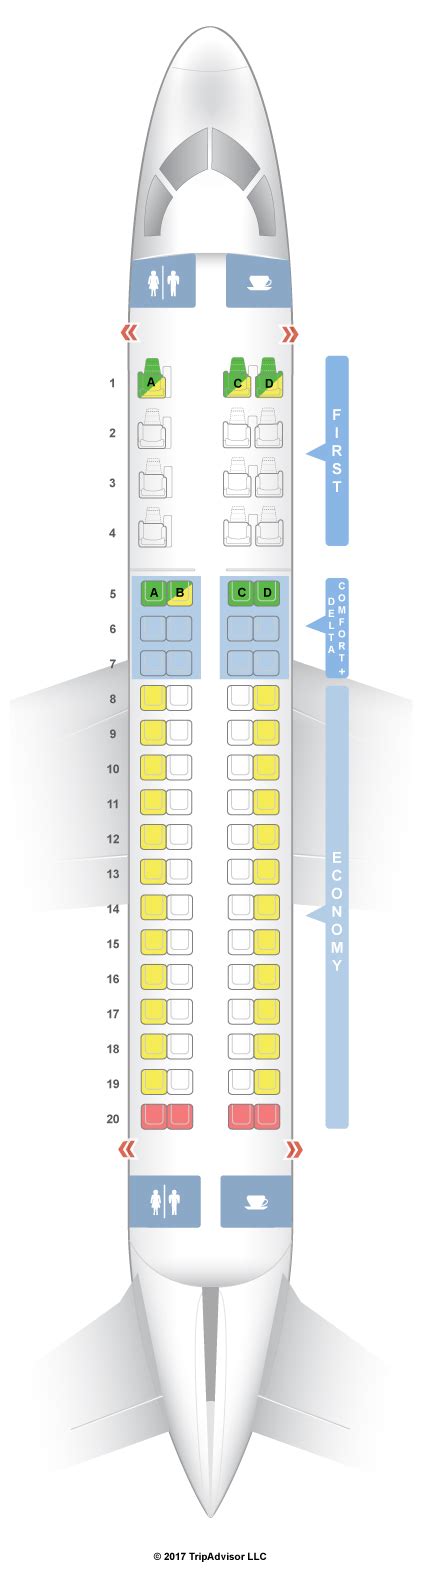 For your next Delta flight, use this seating chart to